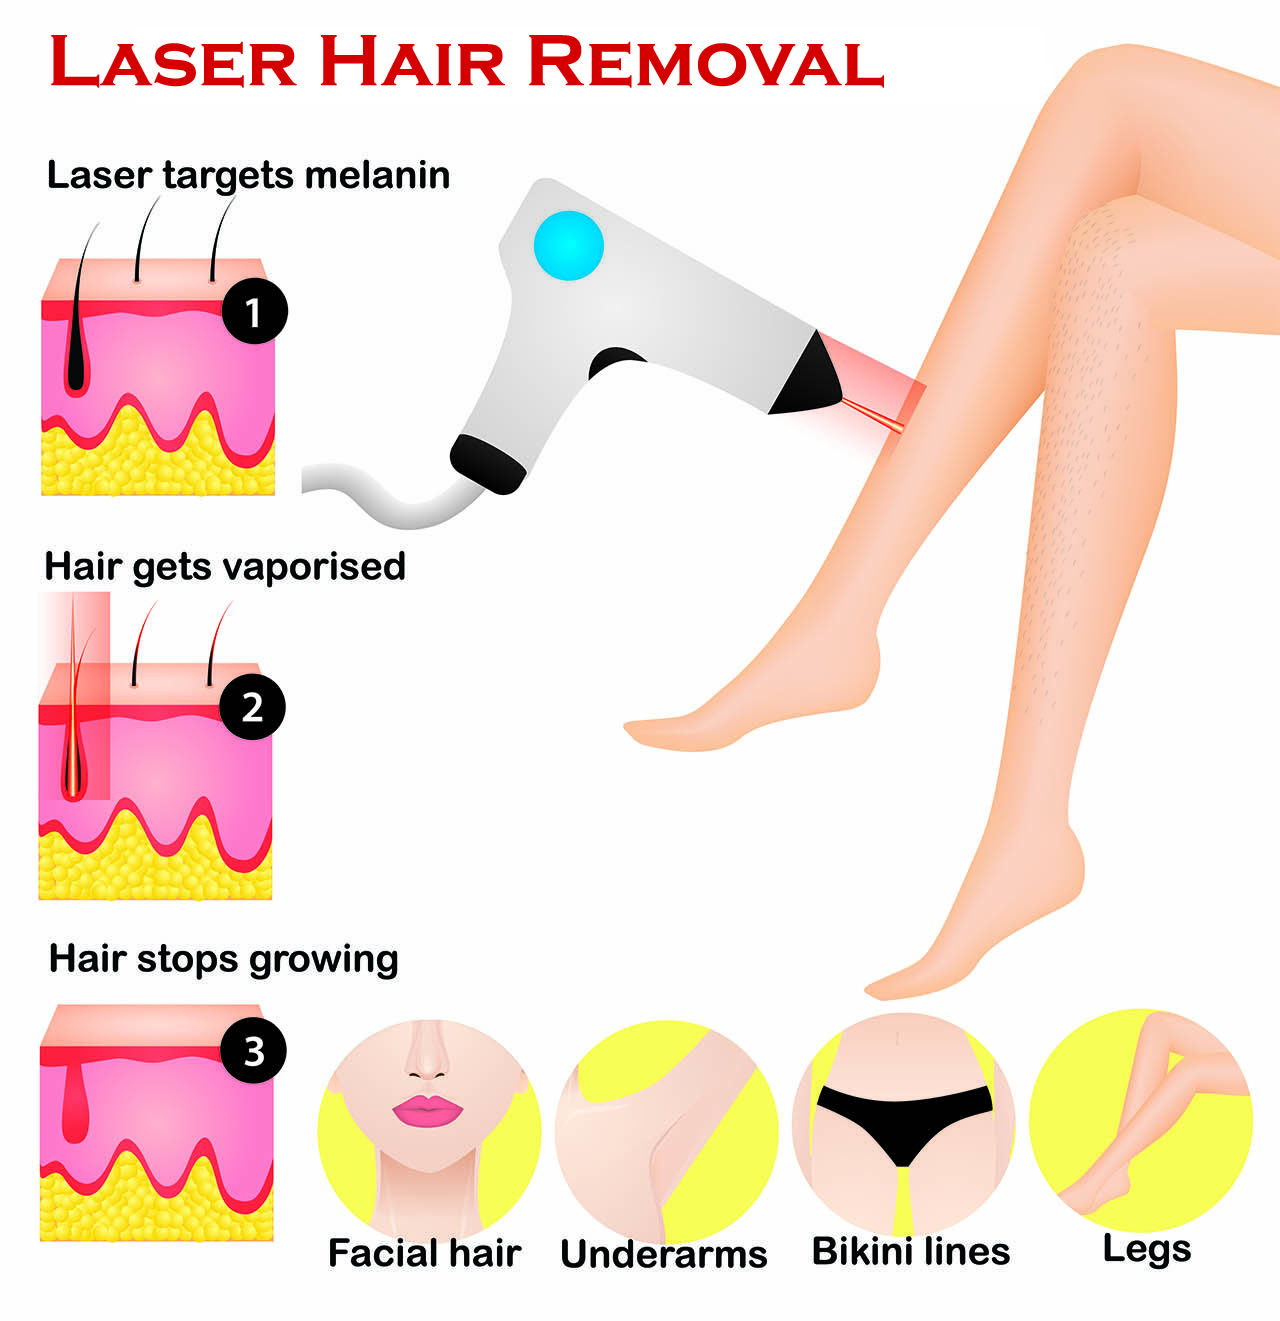 How laser hair removal works